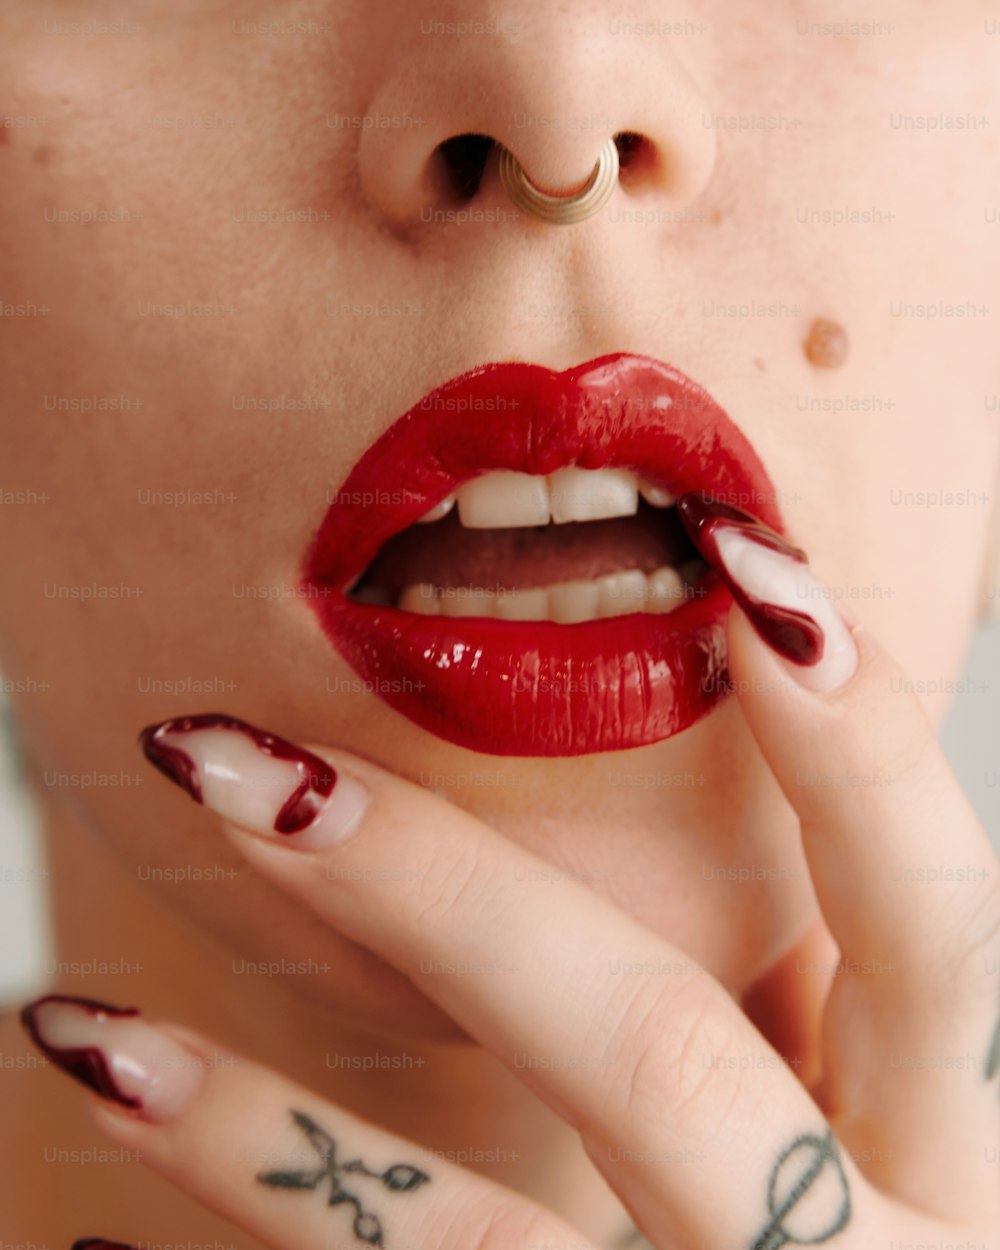 a woman with red and white nail polish on her lips